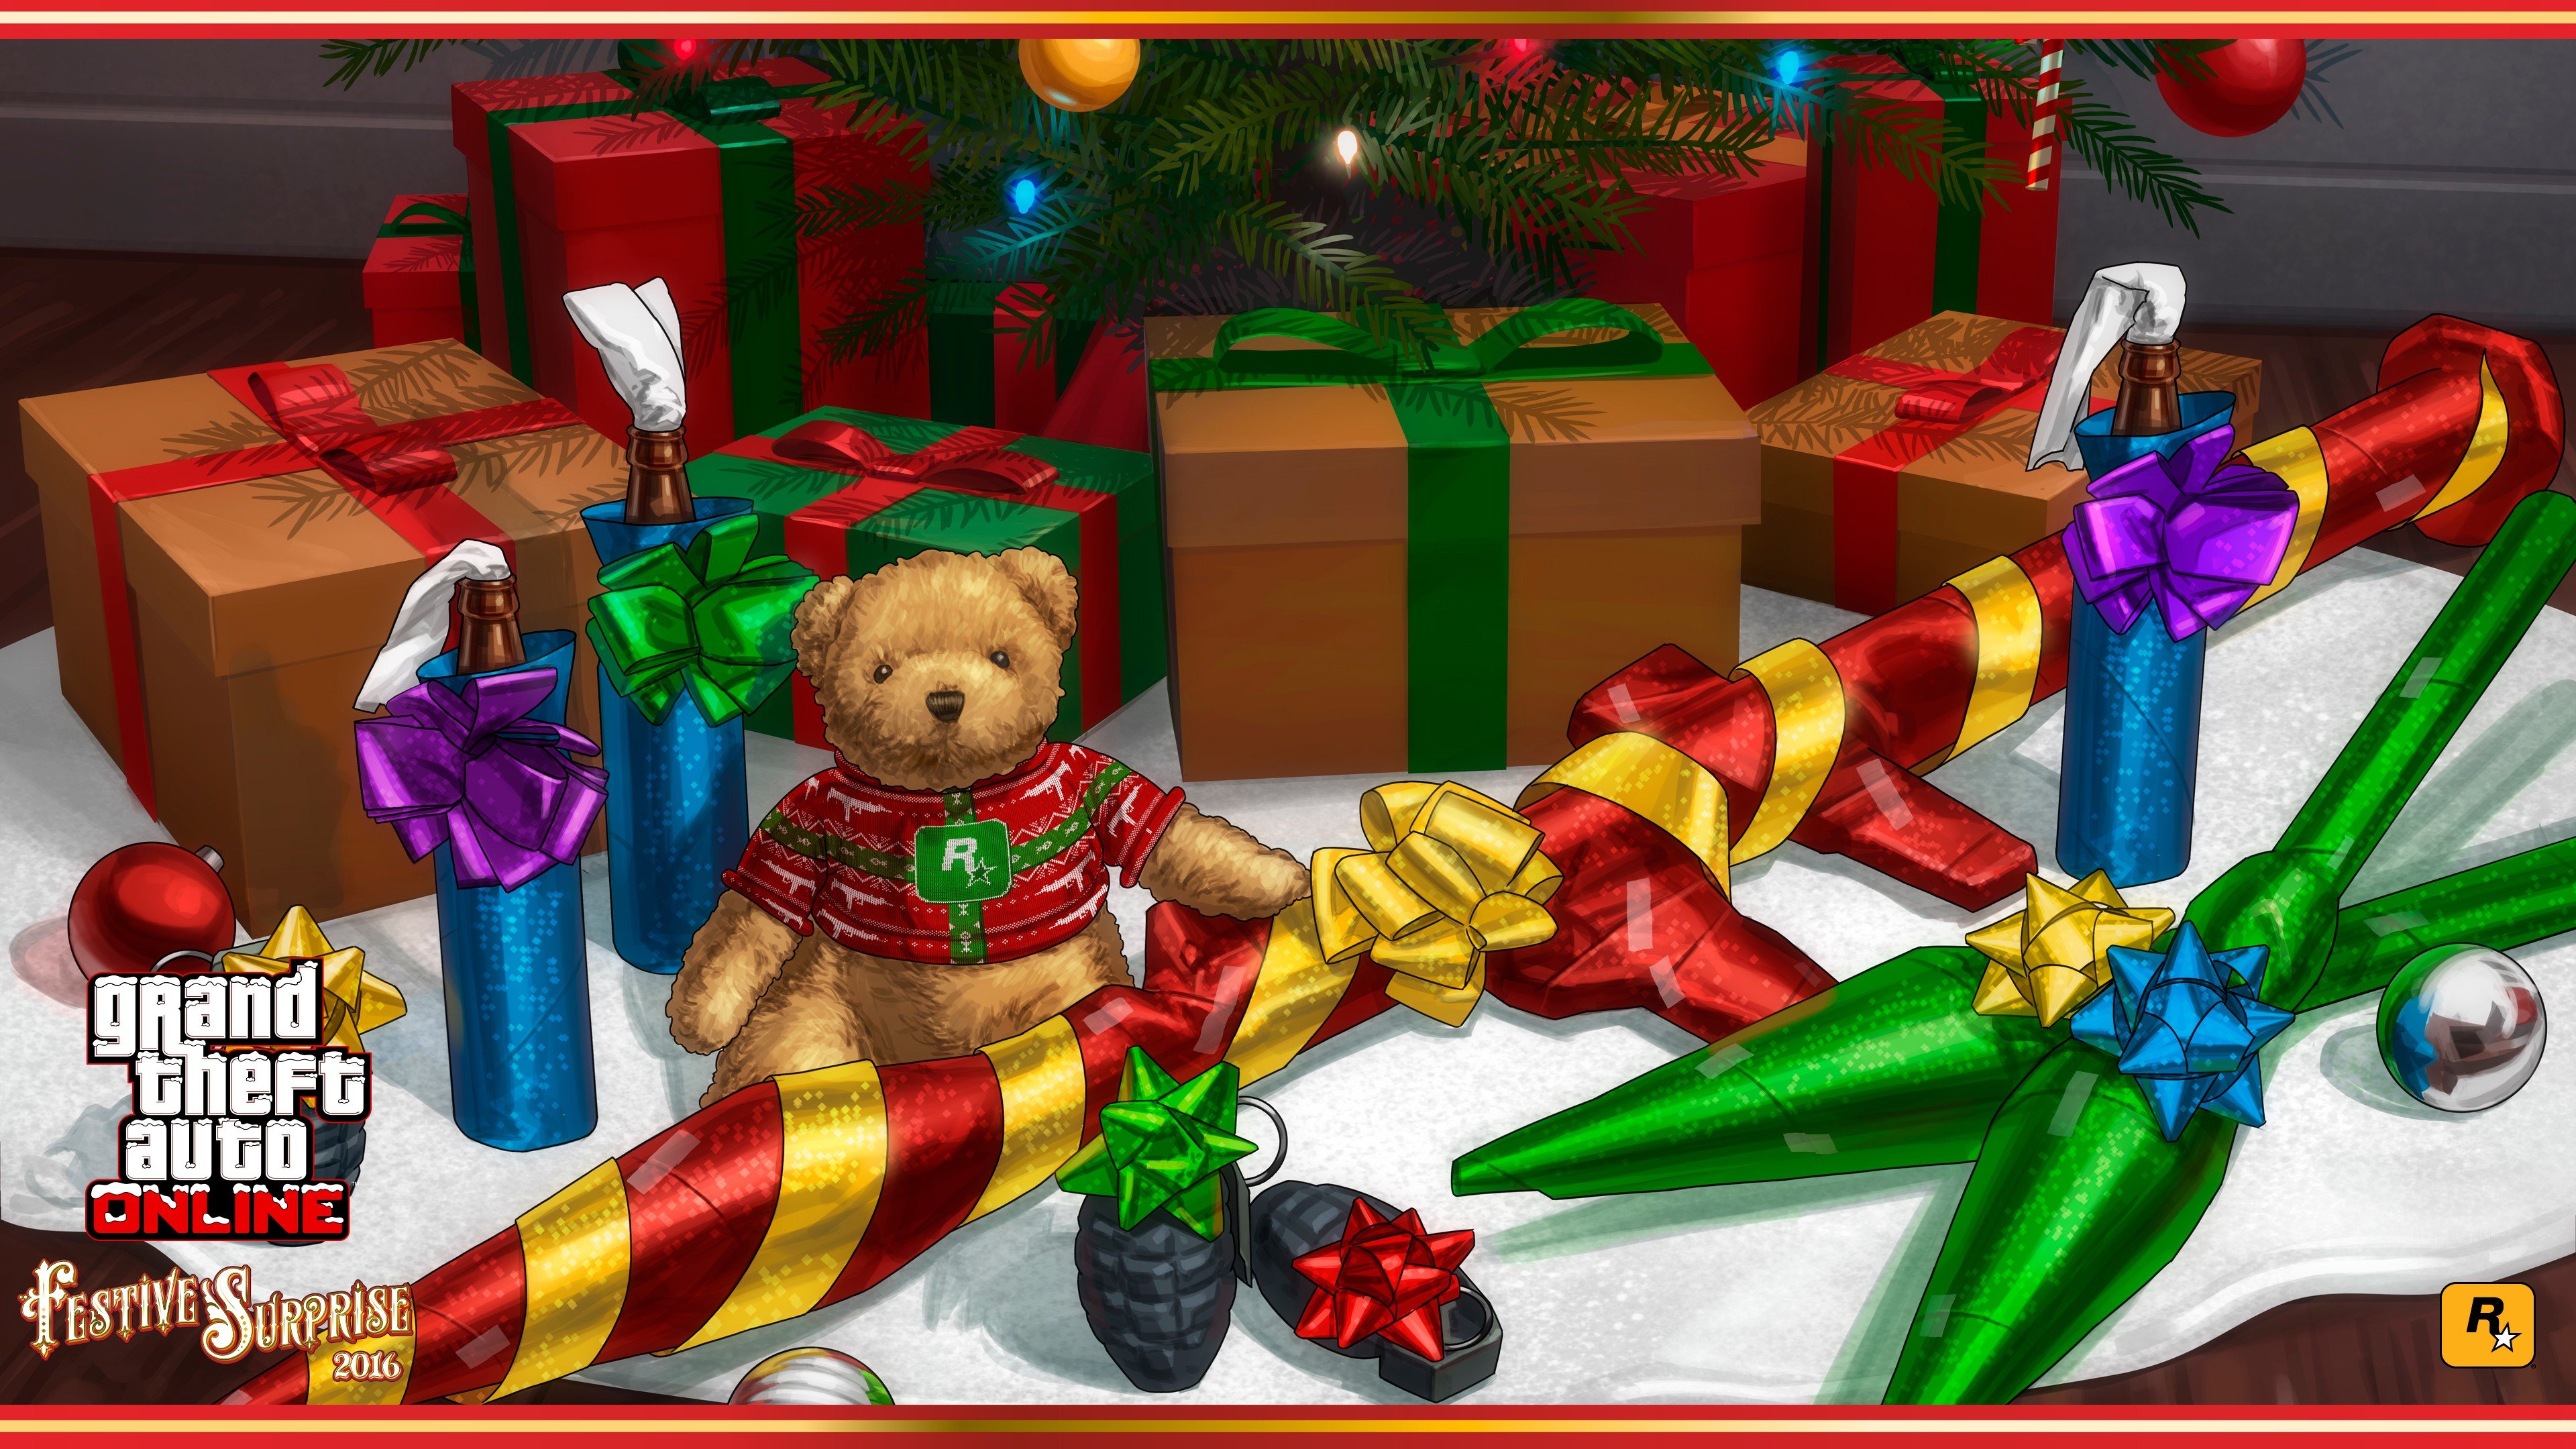 Grand Theft Auto V, Grand Theft Auto Online, Rockstar Games, Holiday, Christmas ornaments, Teddy bears, Weapon Wallpaper